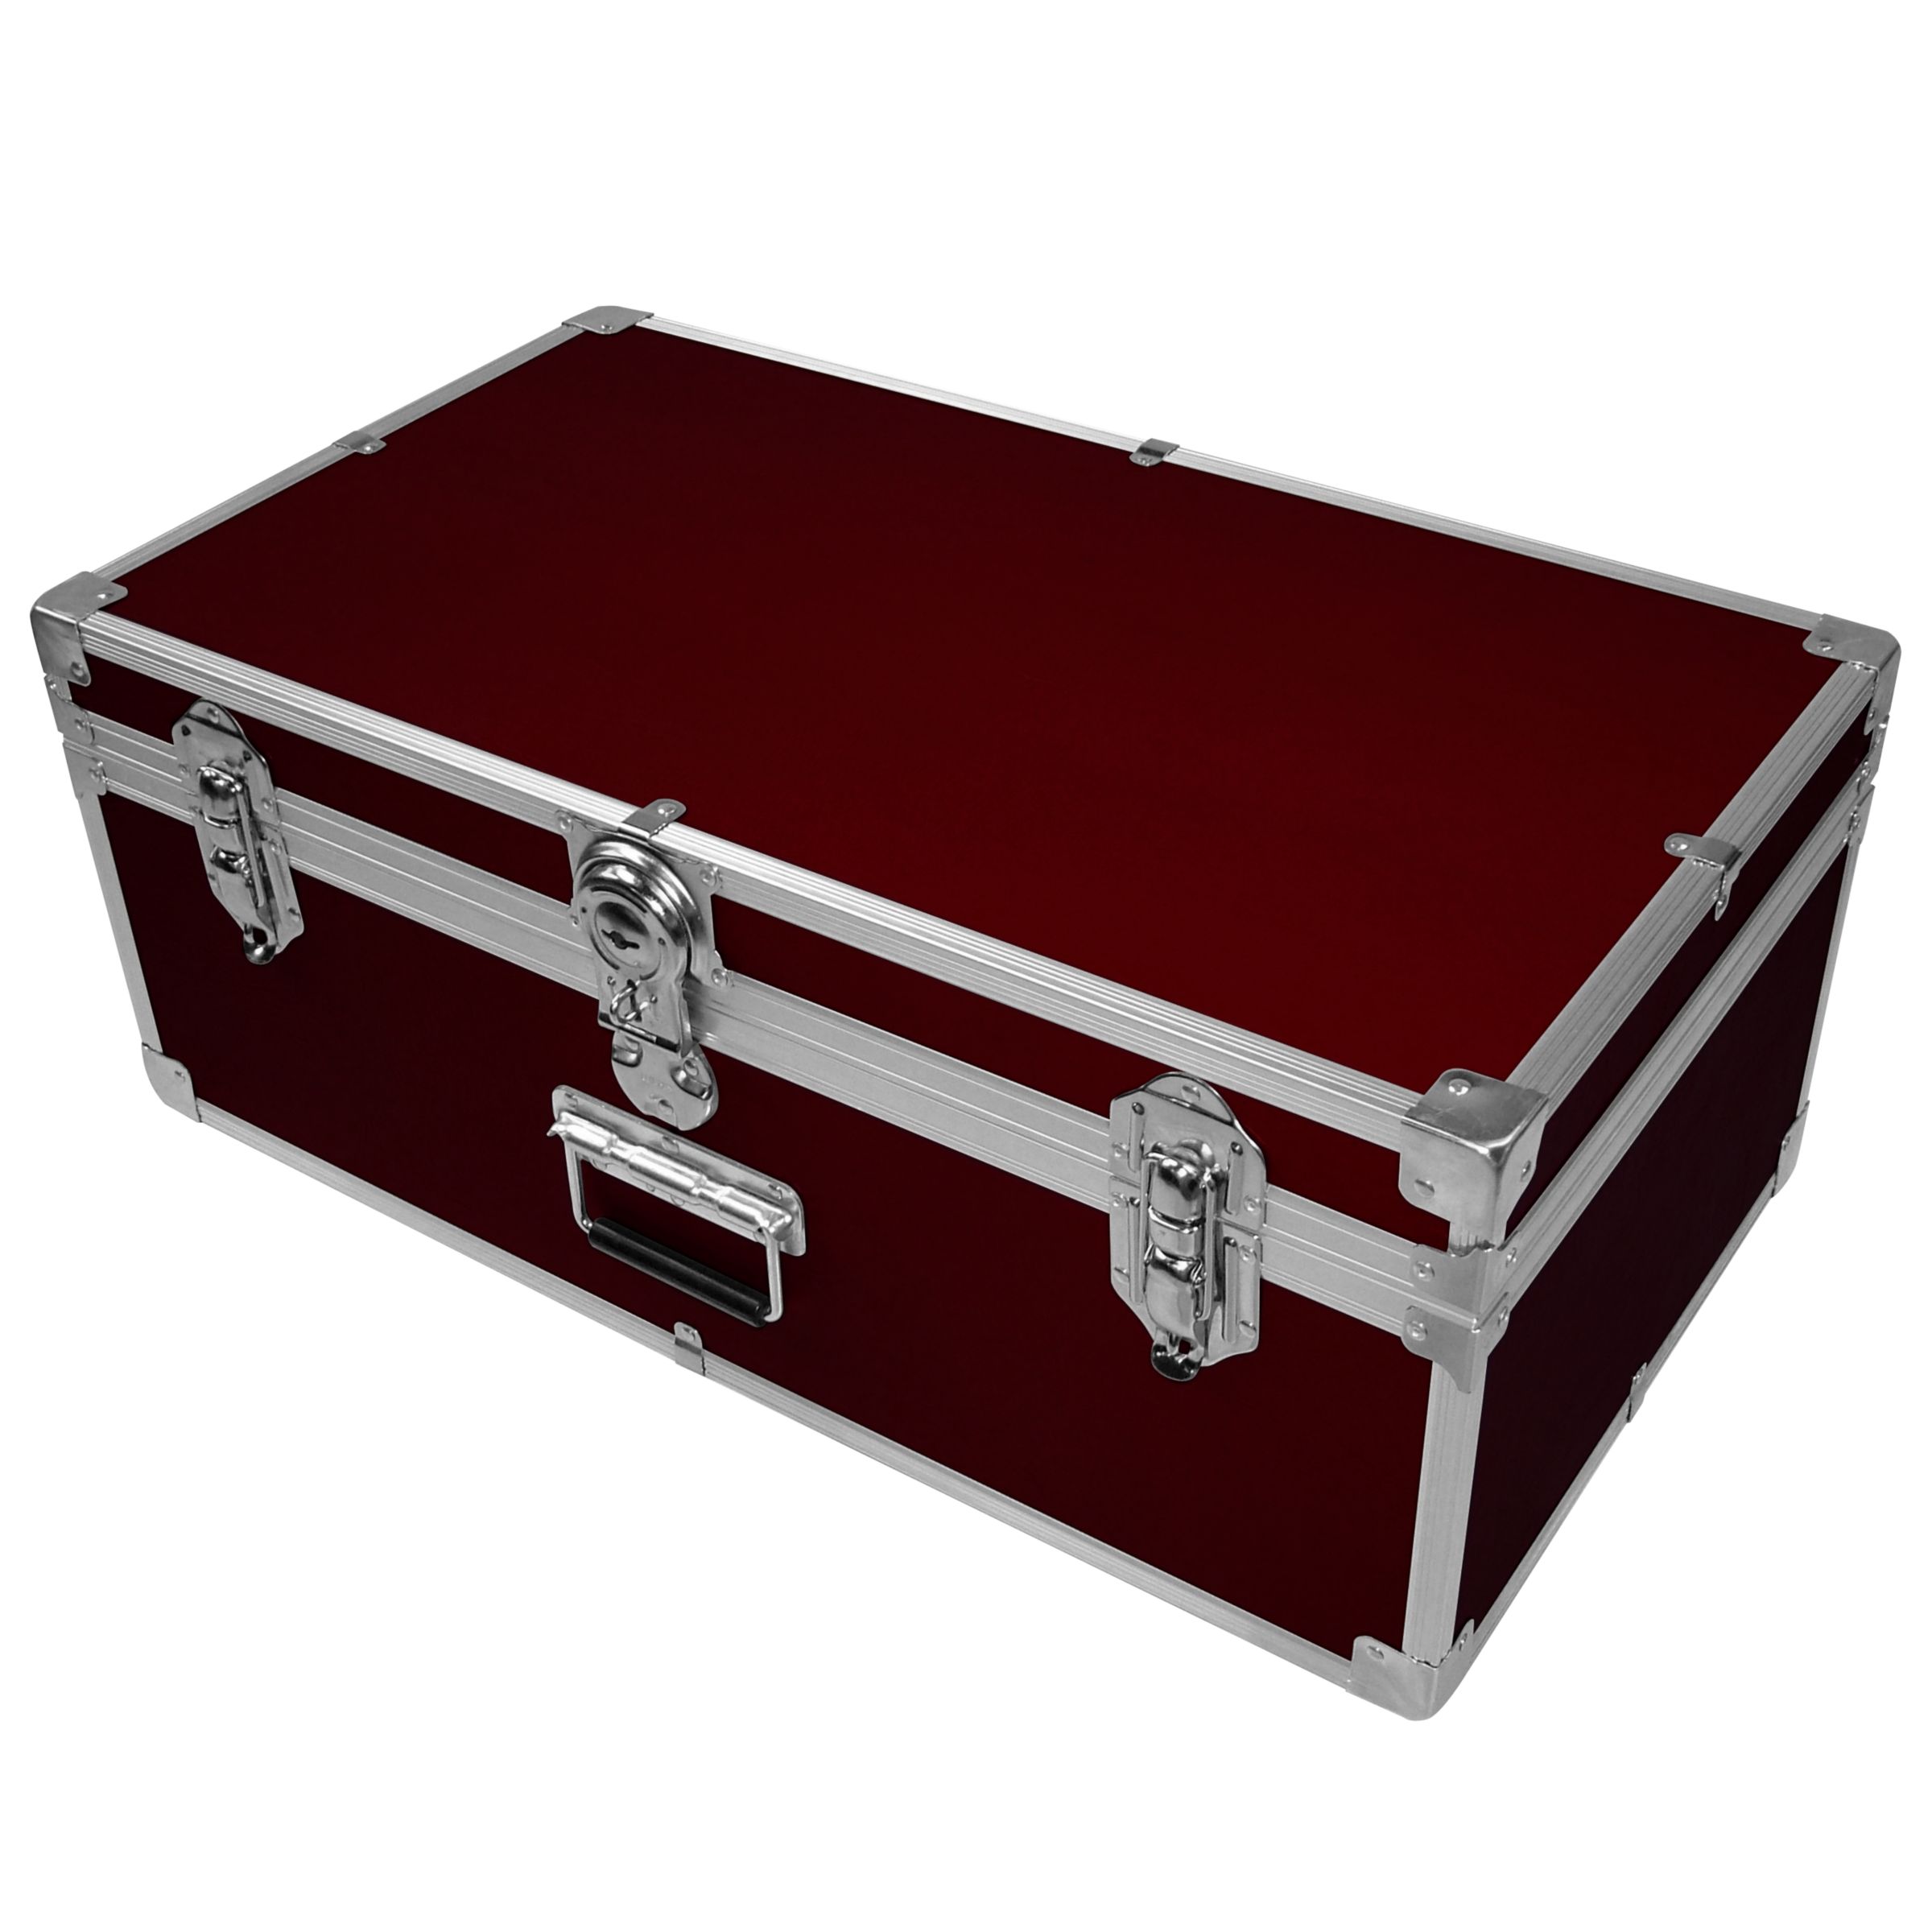 John Lewis Fortified Attache Trunk, Burgundy at JohnLewis